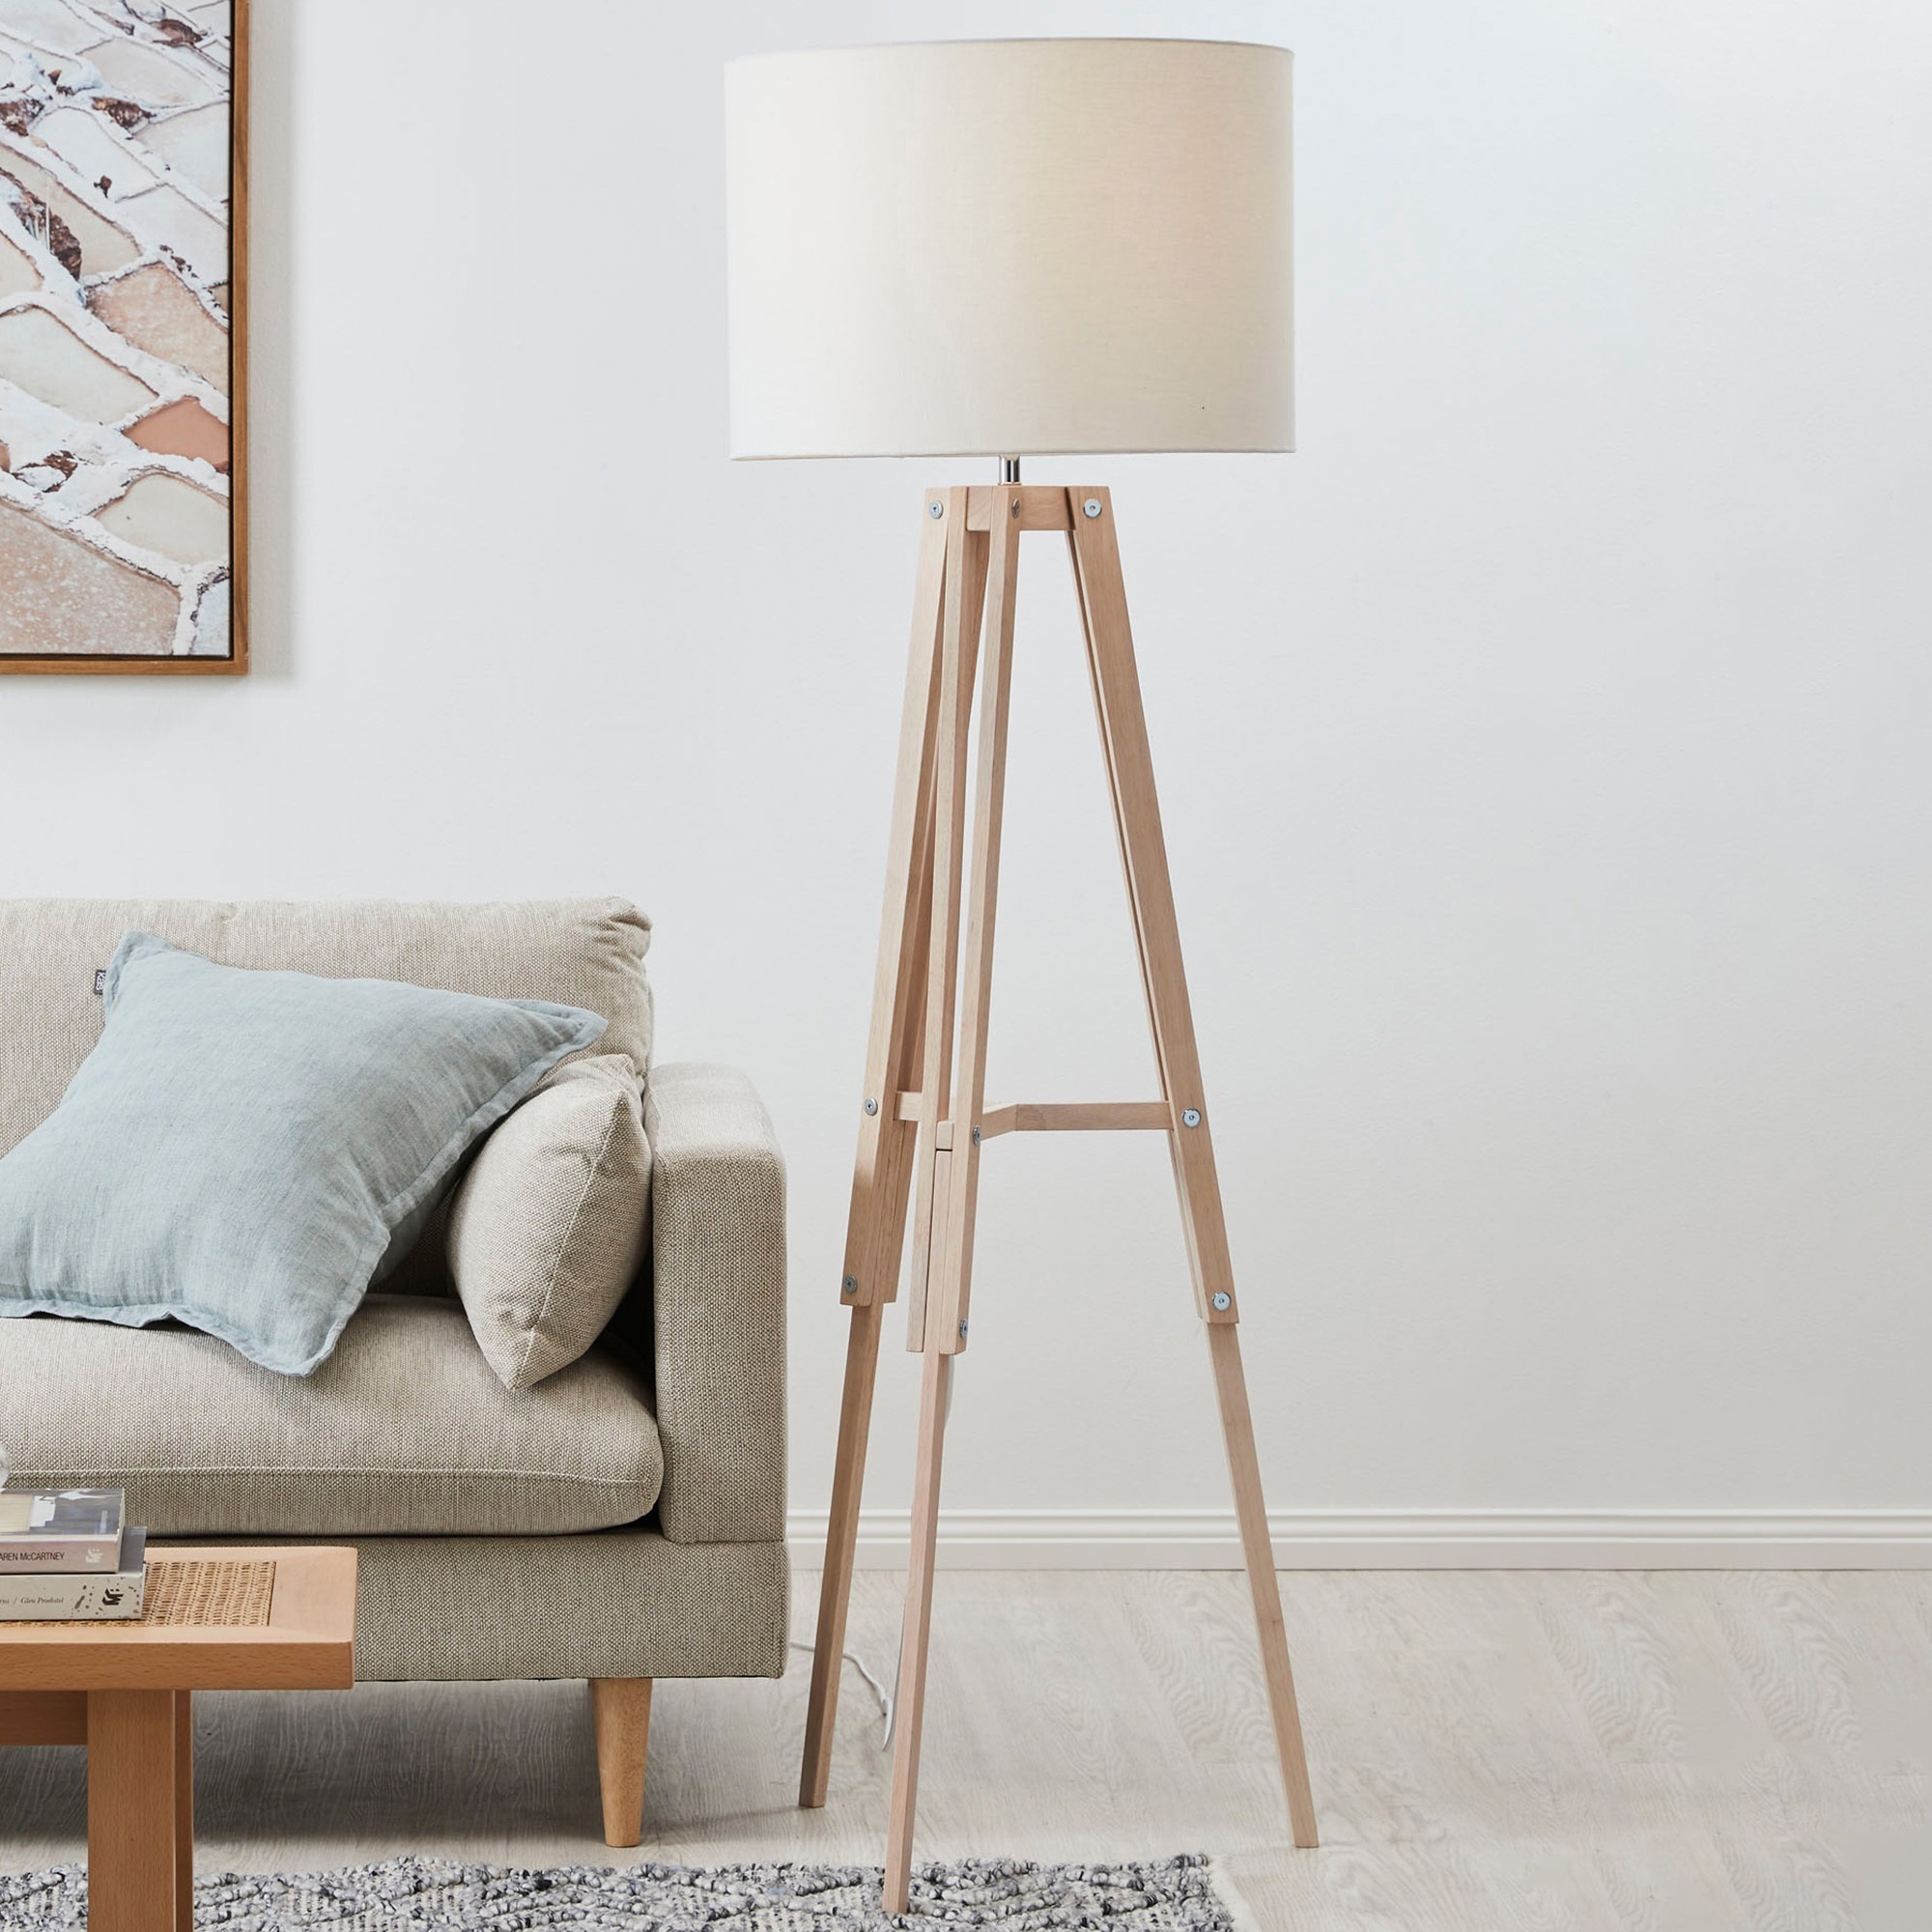 Temple Webster Benson Wooden Tripod, Wooden Tripod Lamp Stand